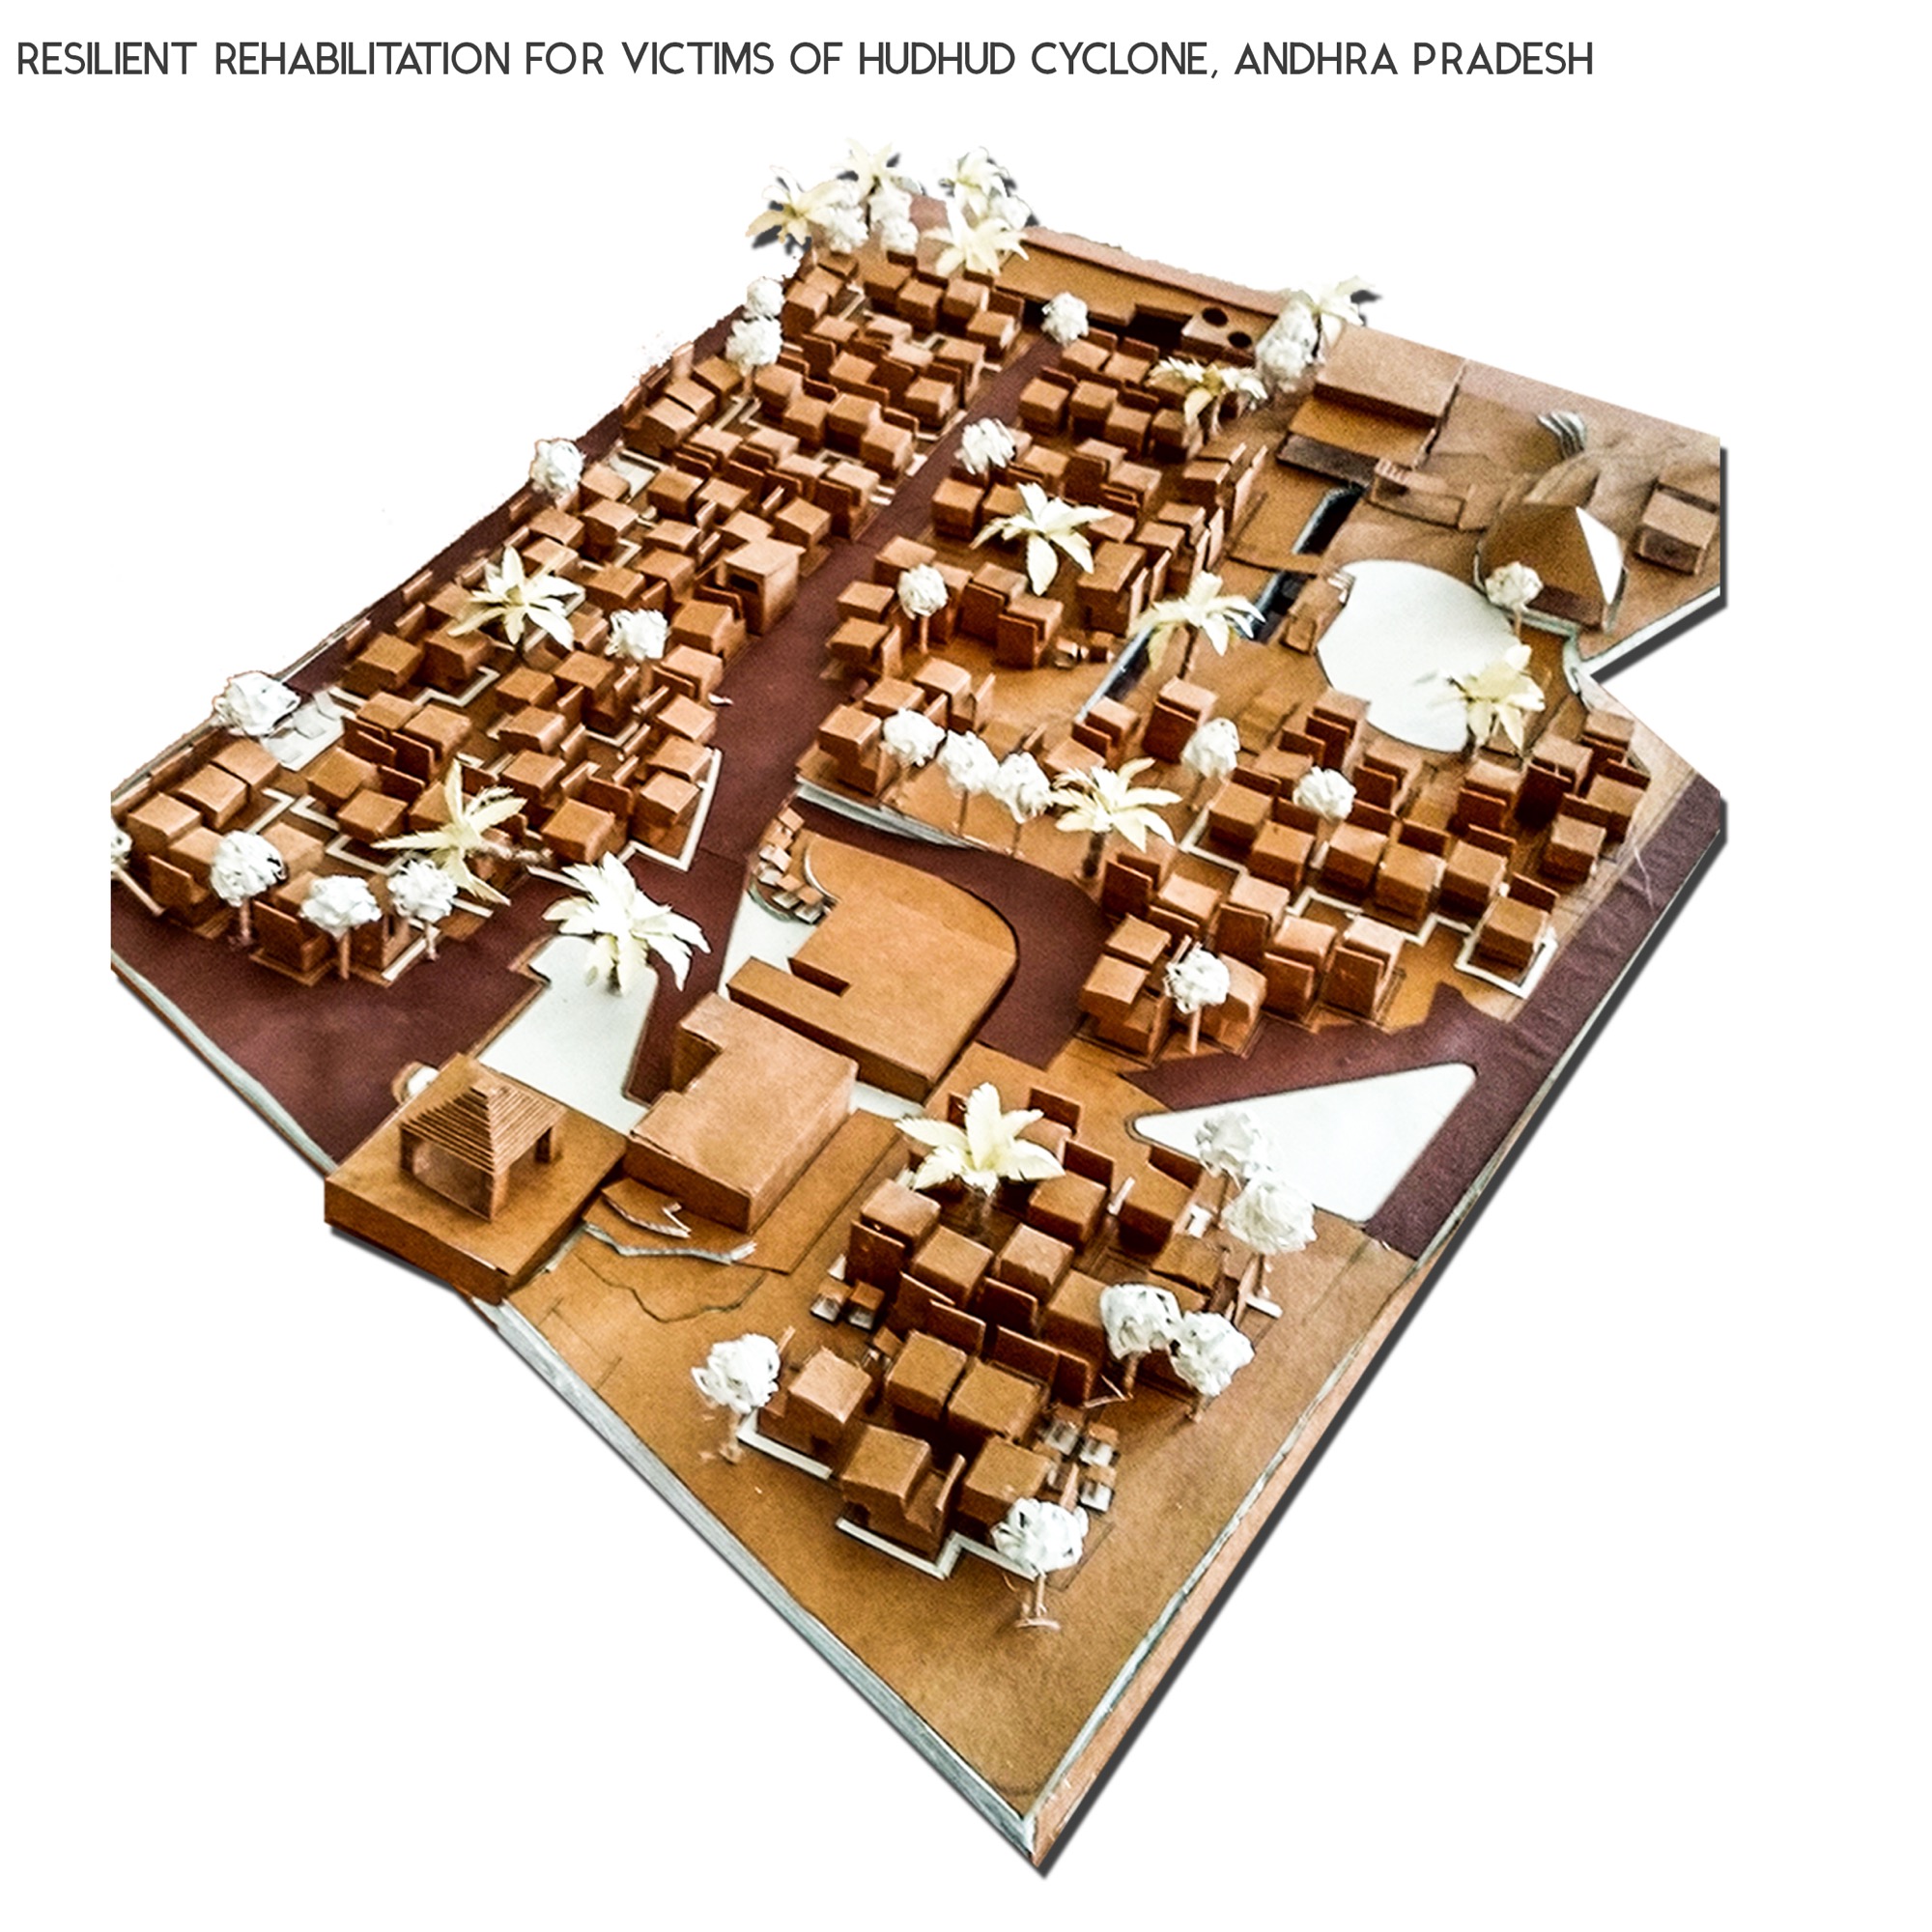 B.Arch Thesis: RESILIENT REHABILITATION FOR VICTIMS OF HUDHUD CYCLONE, ANDHRA PRADESH, by Sanand Telang 45